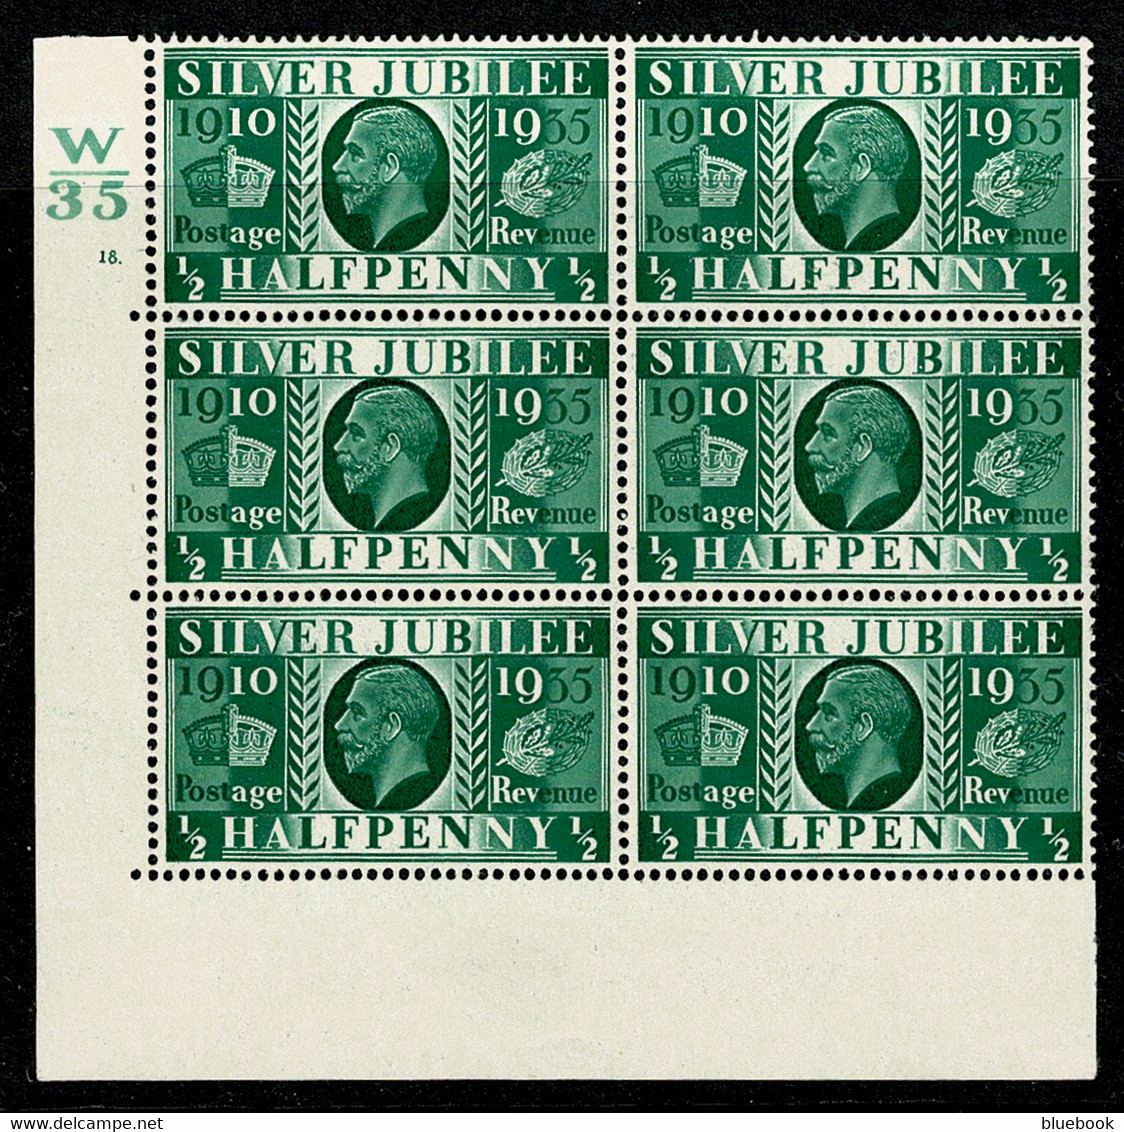 Ref 1587 - GB 1935 Silver Jubilee 1/2d Control Block (W35) Cylinder 18. Of 6 Stamps MNH/MM - Neufs